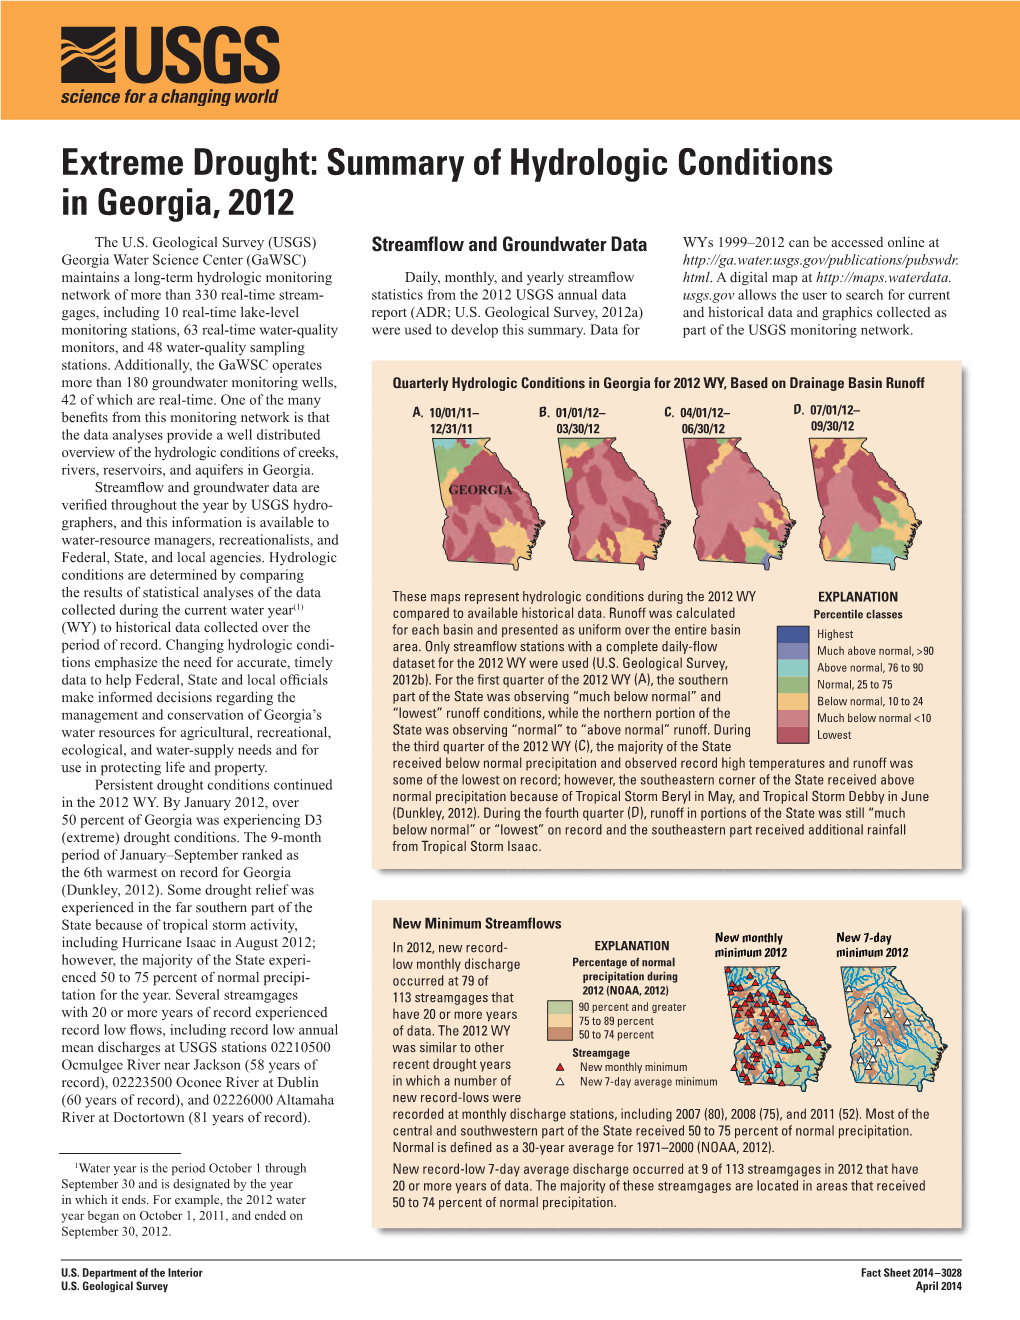 Extreme Drought: Summary of Hydrologic Conditions in Georgia, 2012 the U.S